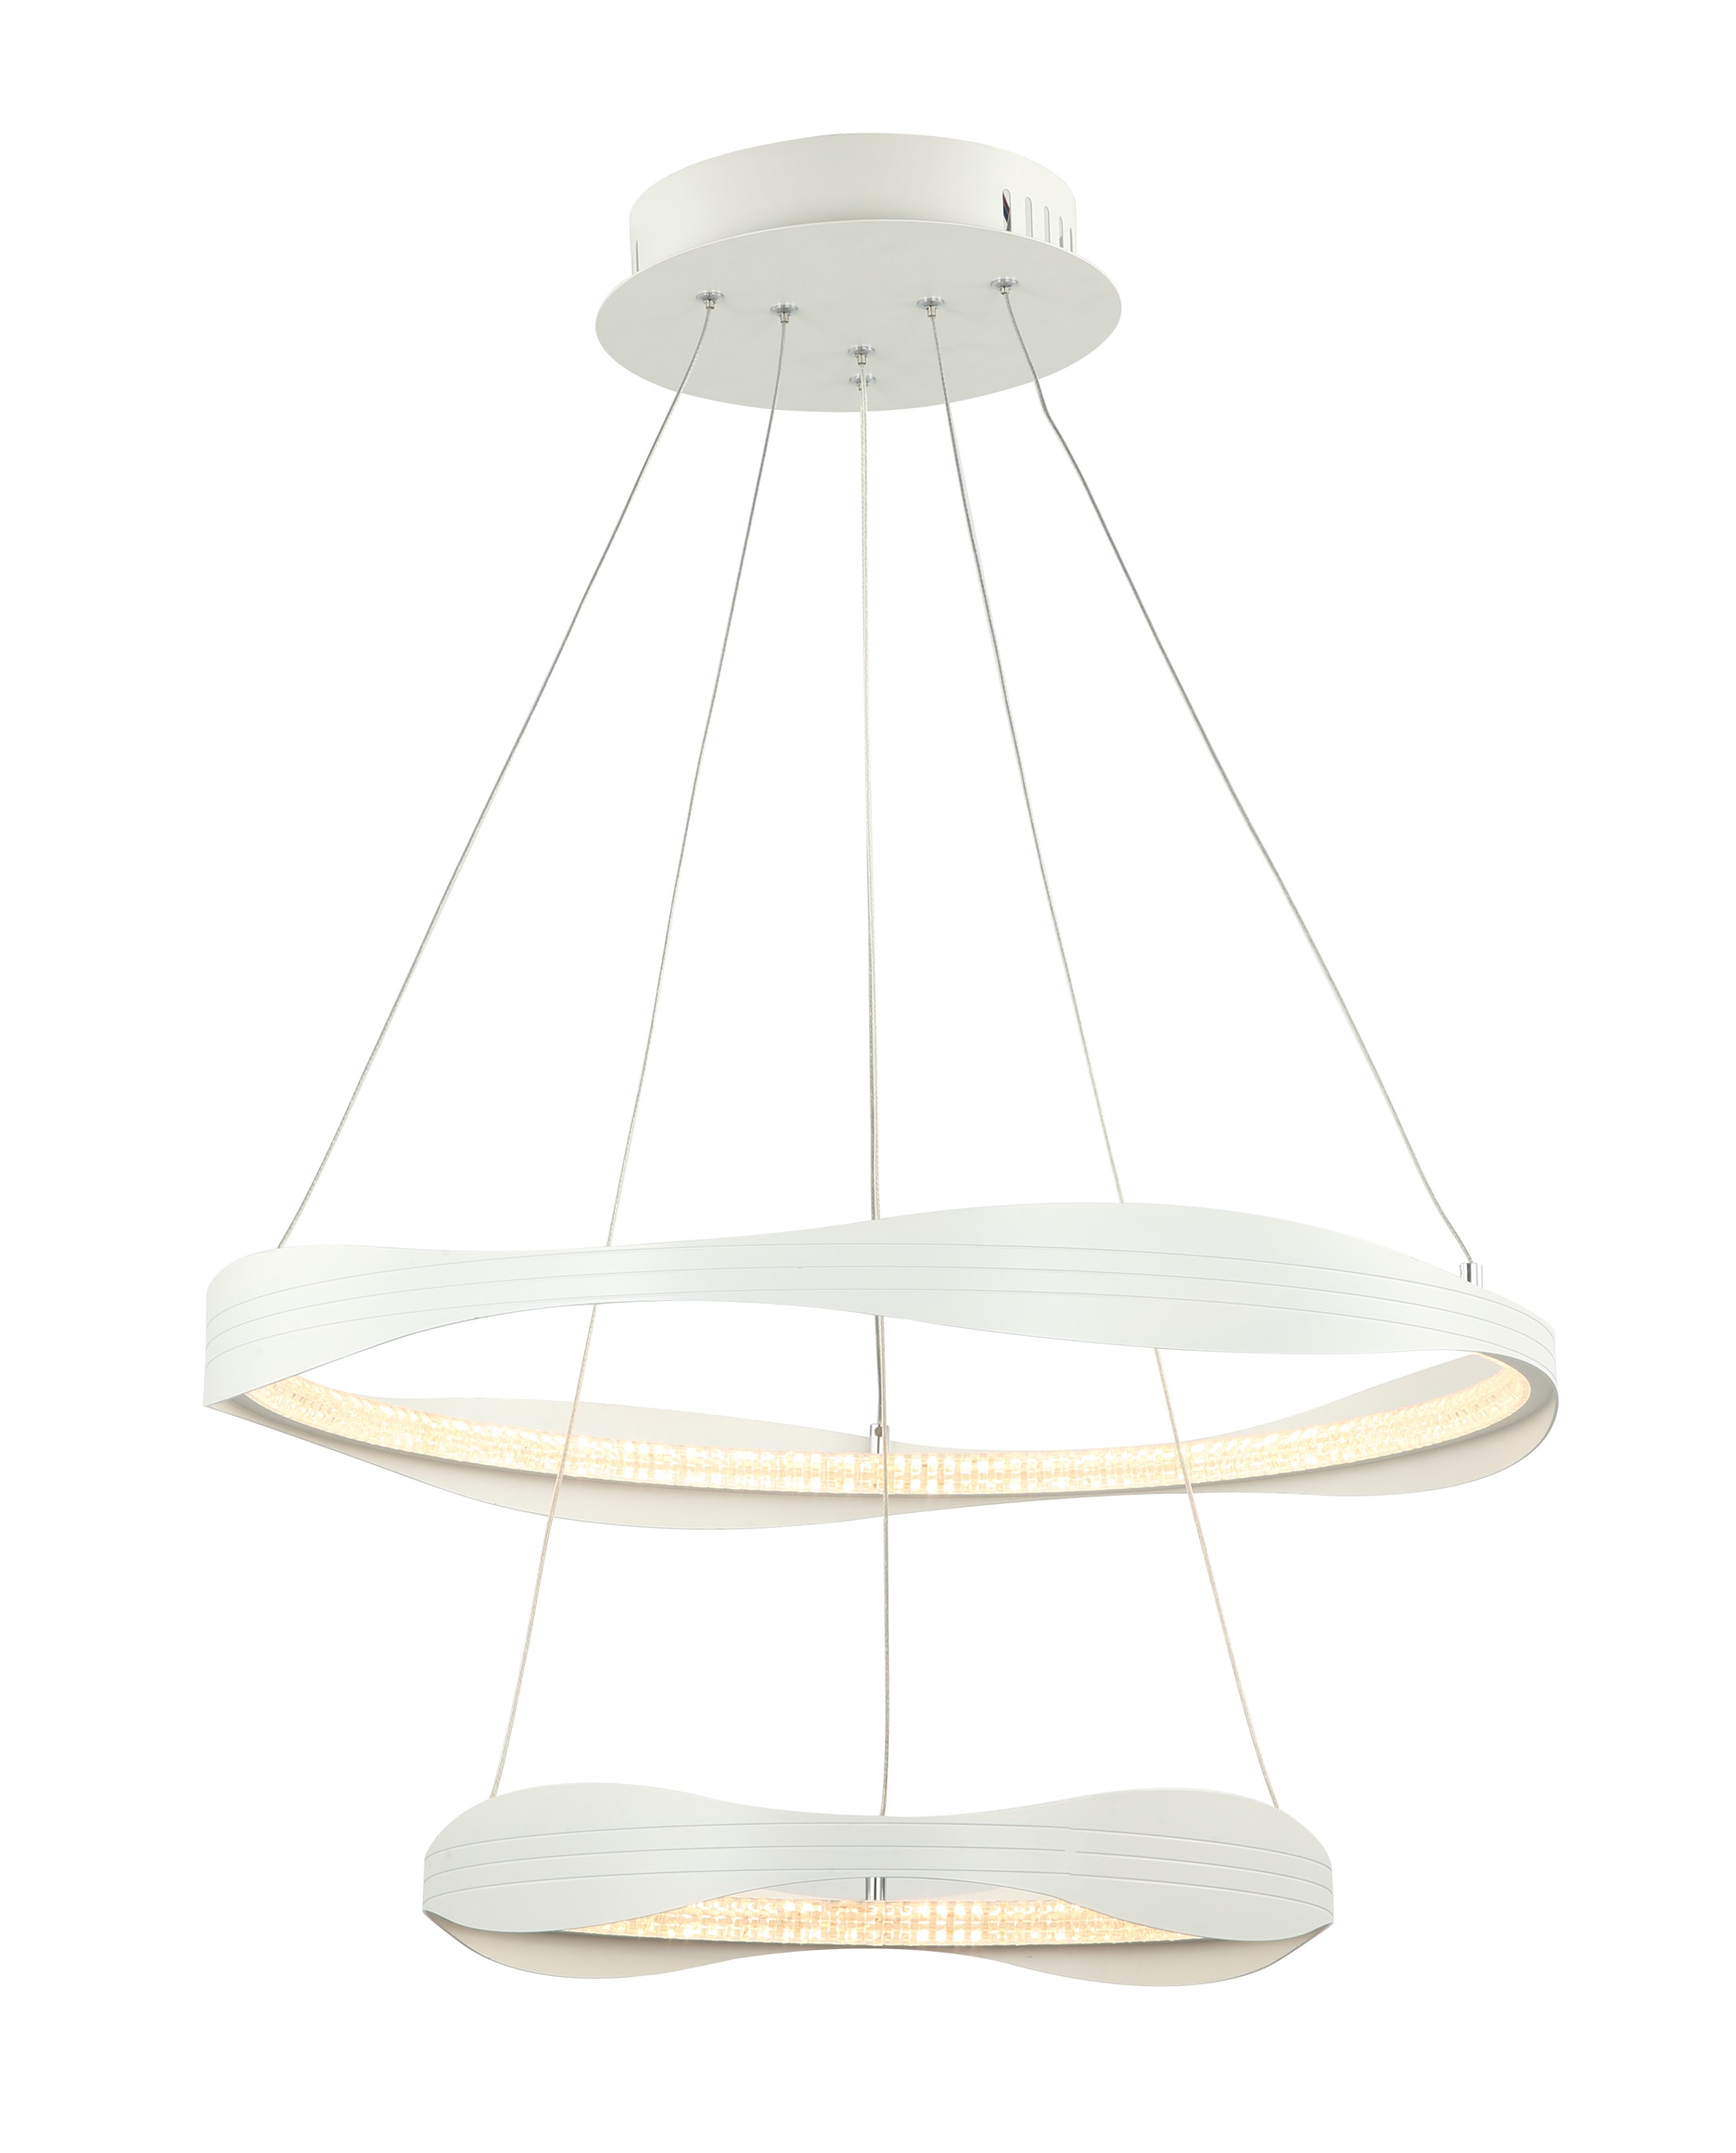 industry-leading modern chandeliers contemporary supply for restaurant-1